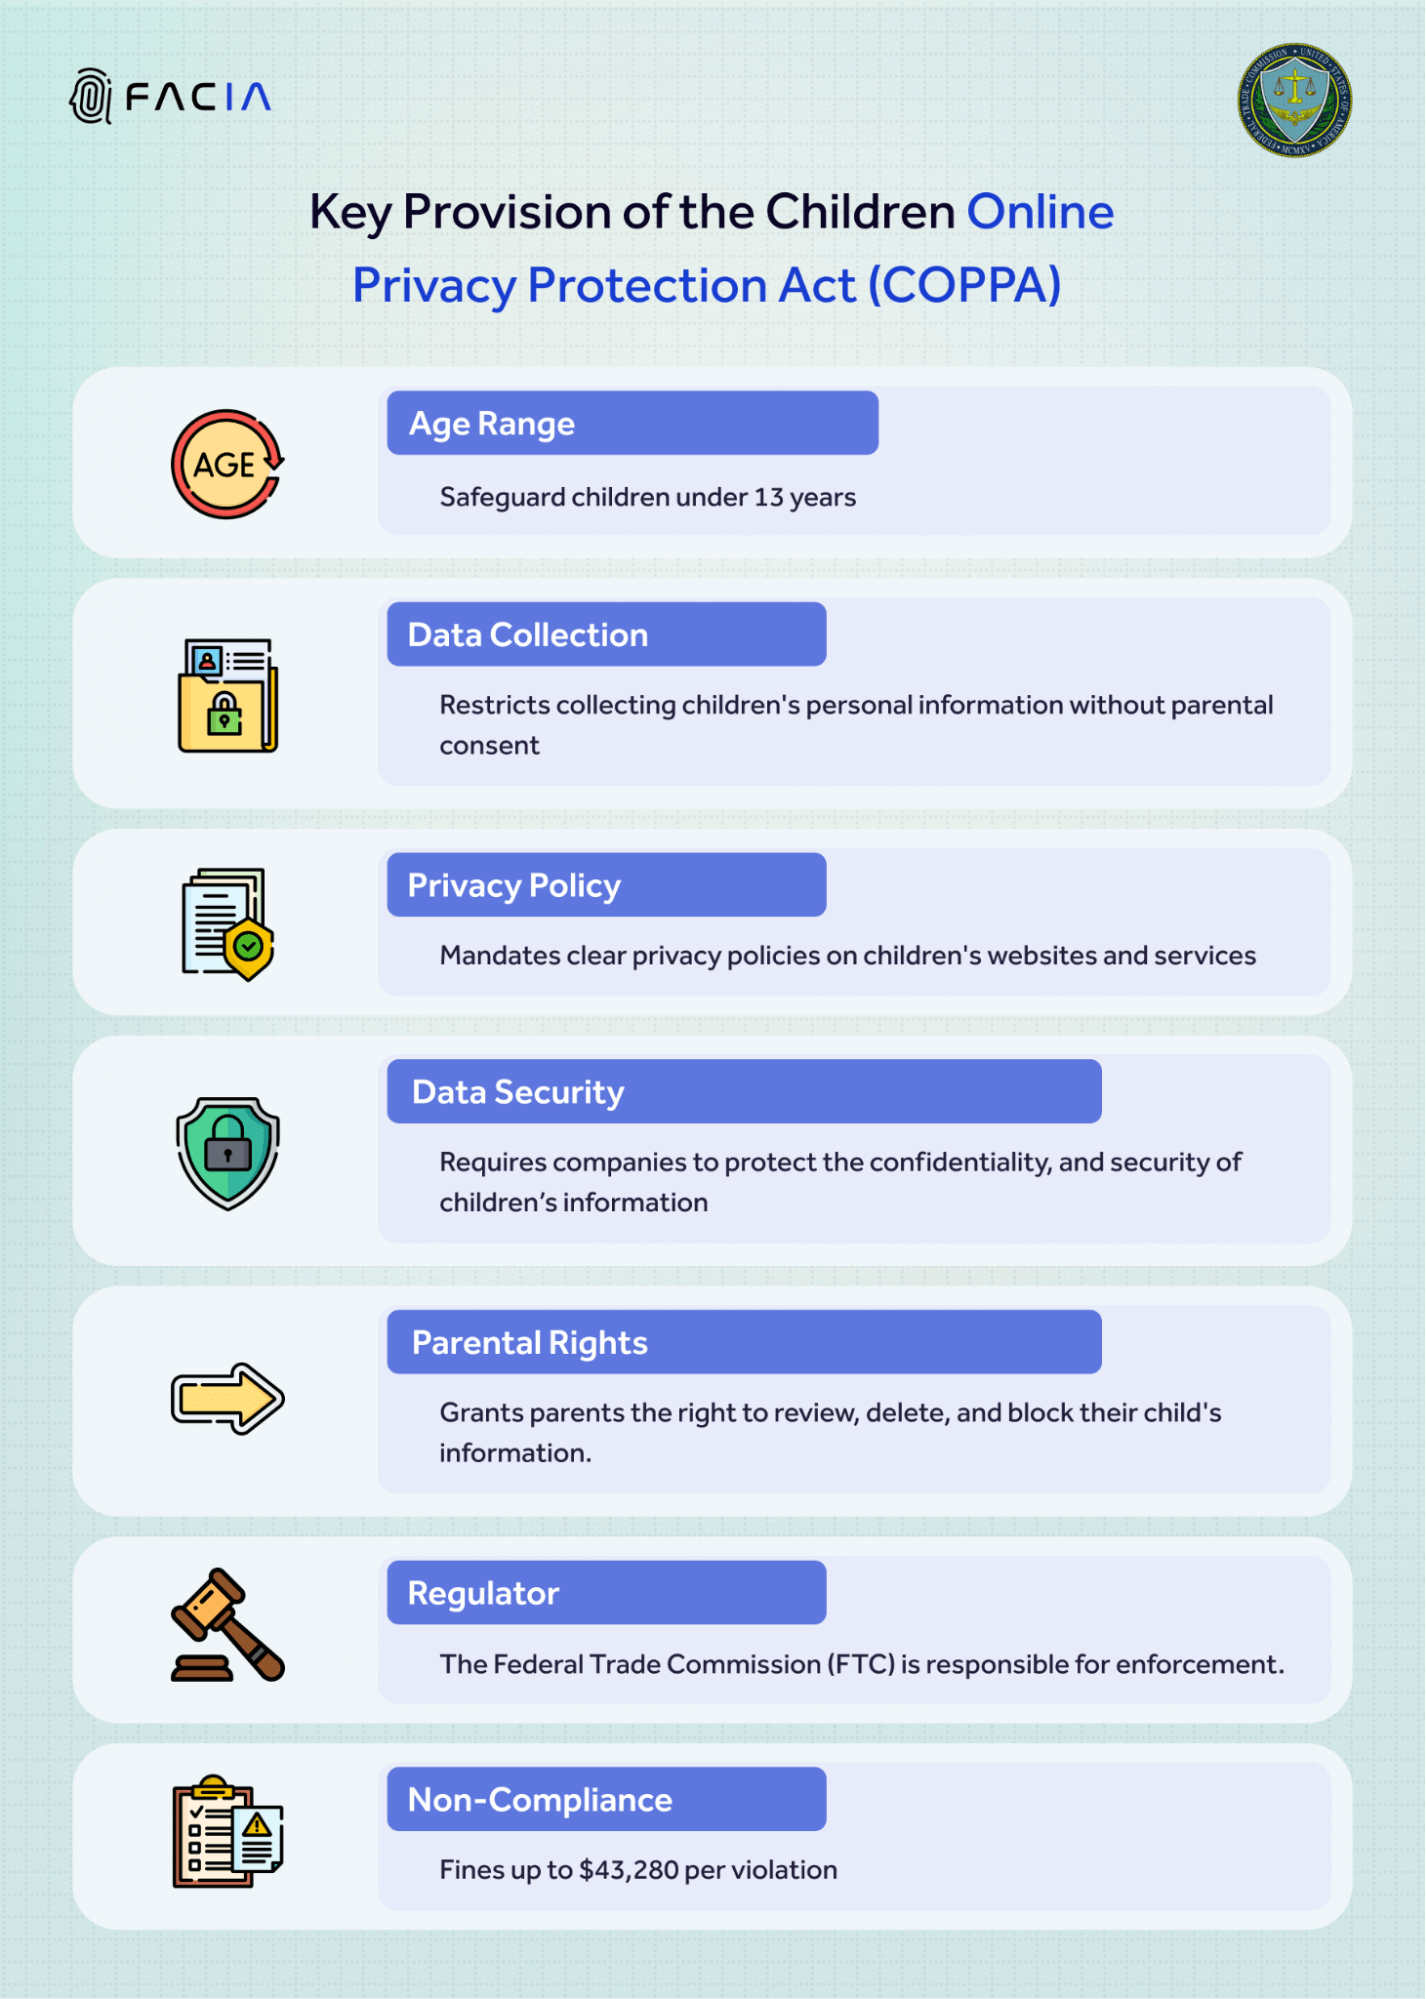 This infographic shows the key provisions of COPPA including age range, data collection, privacy policy, data security, parental rights, regulator, and penalties for non-compliance.